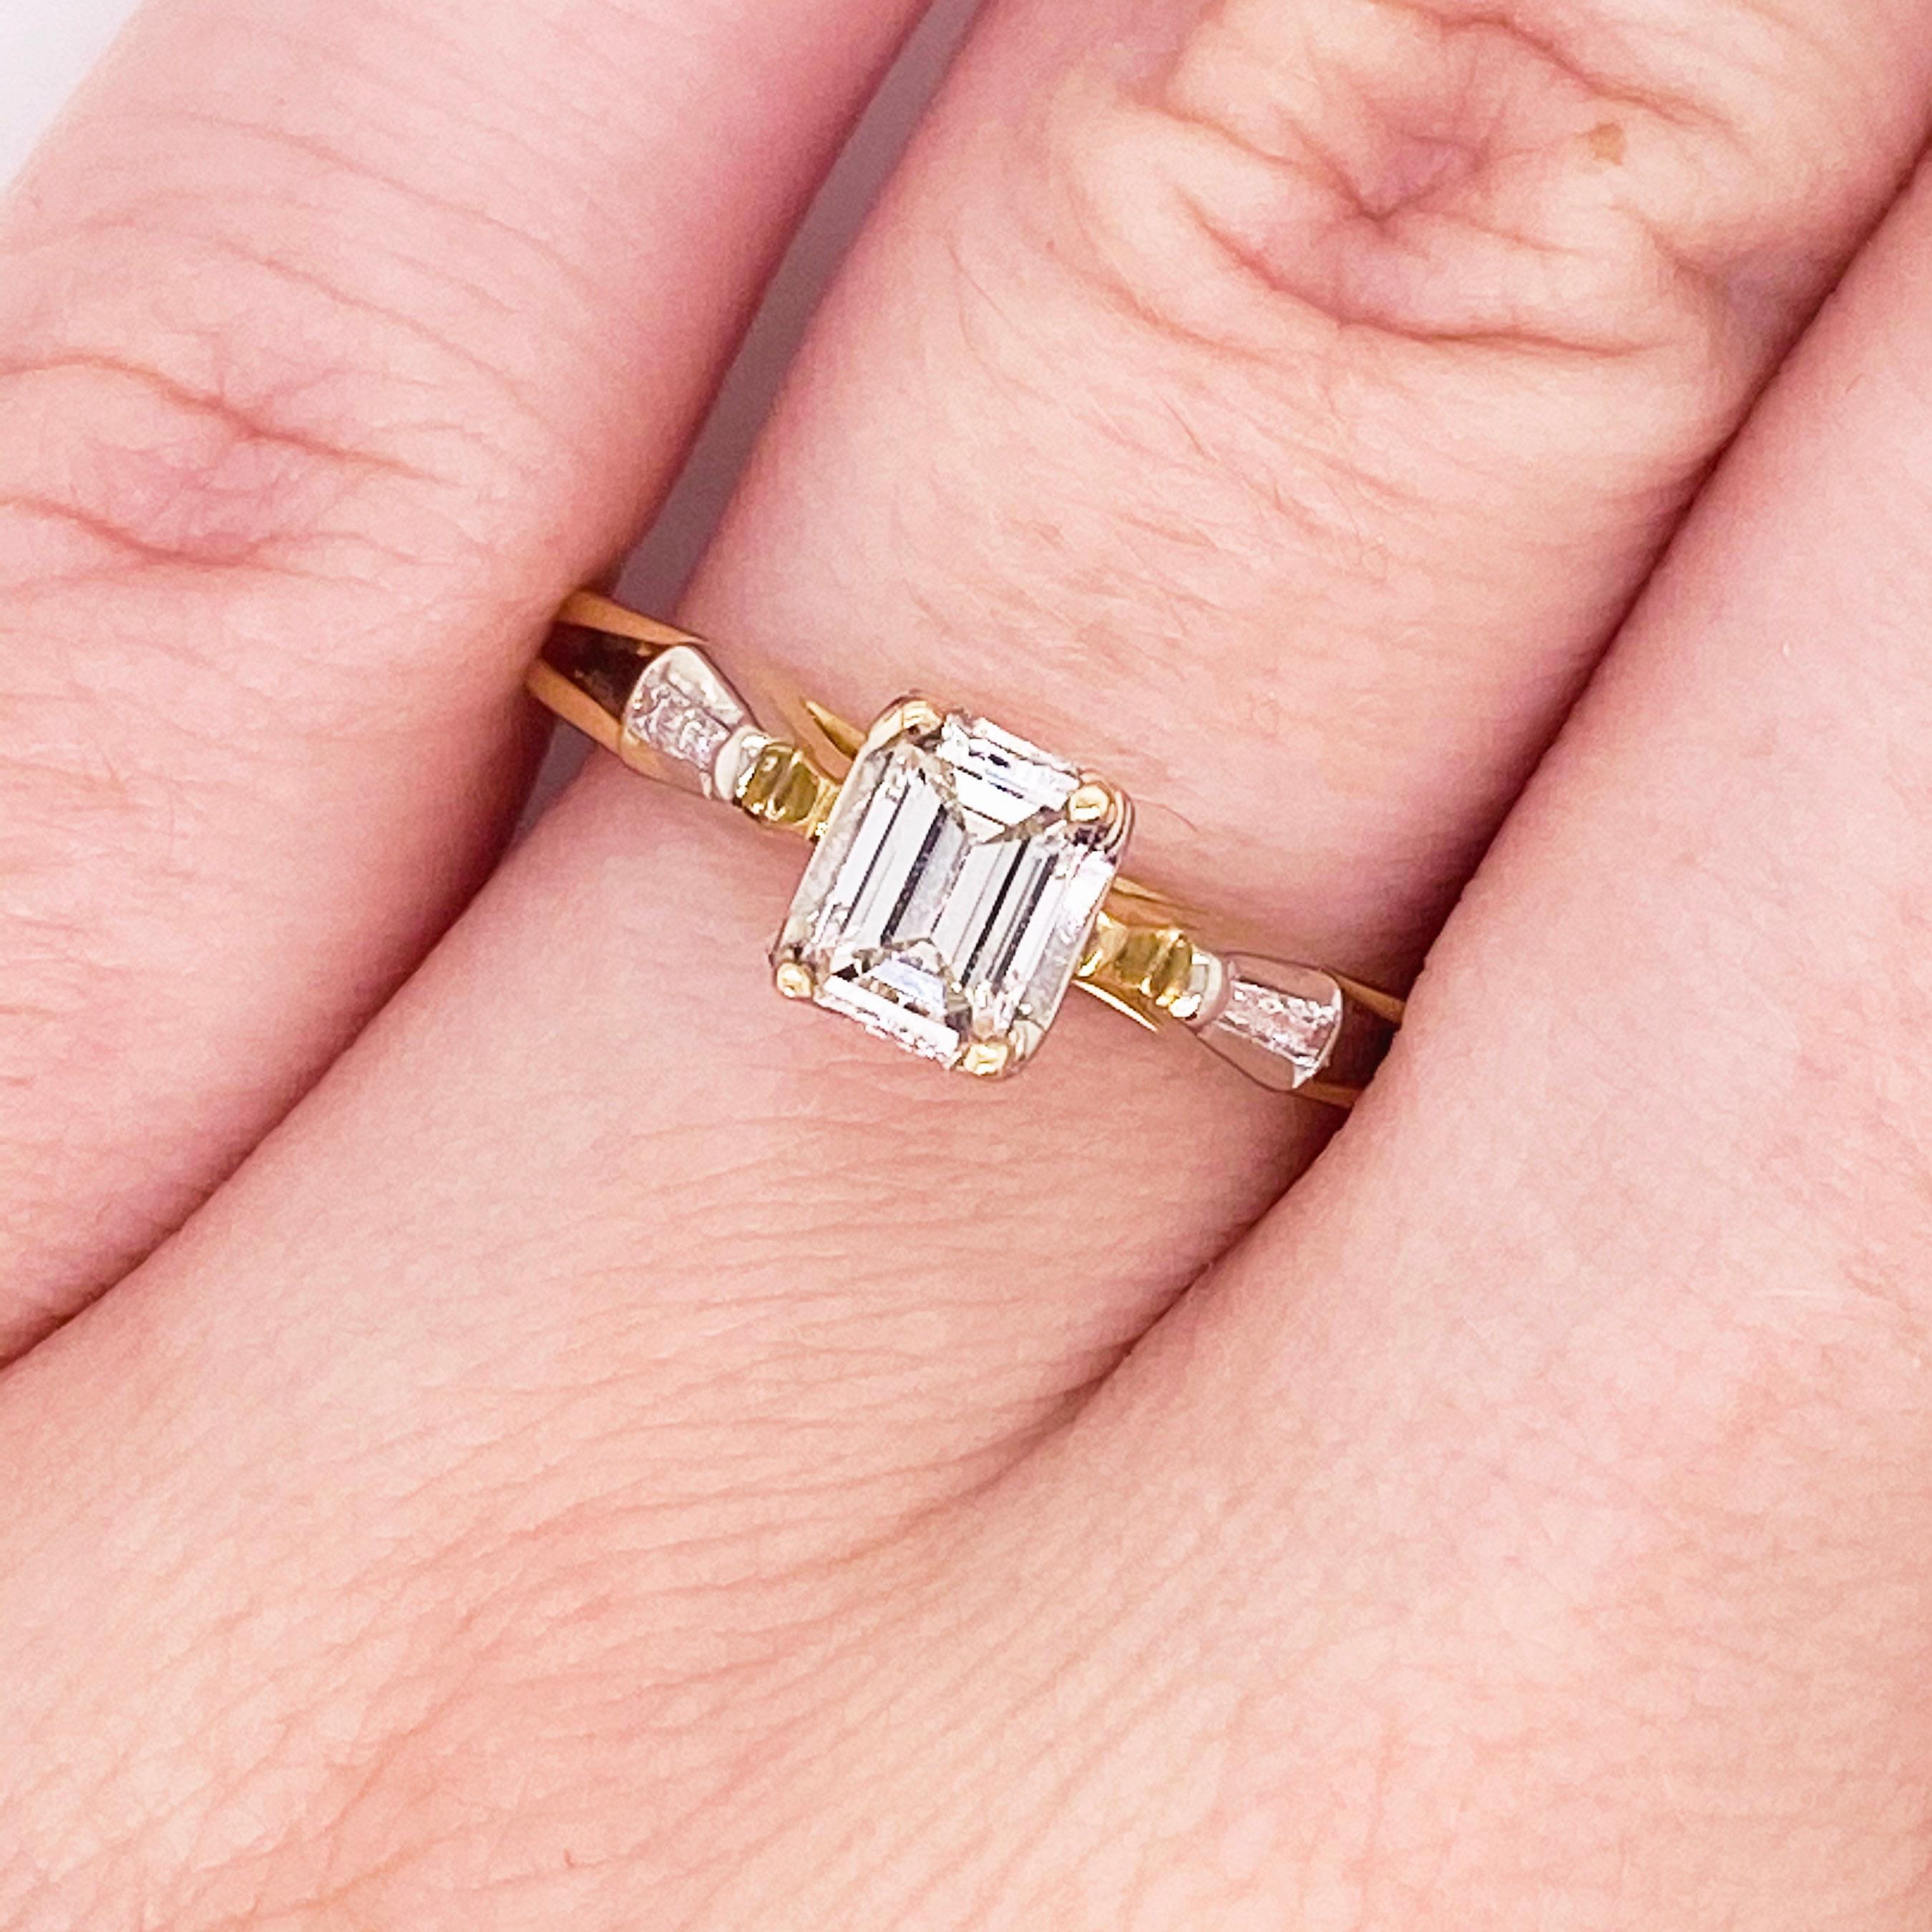 This stunningly beautiful cathedral set three stone emerald cut diamond engagement ring would make anyone thrilled to receive it! These brilliant diamonds set in polished 14k yellow gold provide a look that is very modern and classic at the same